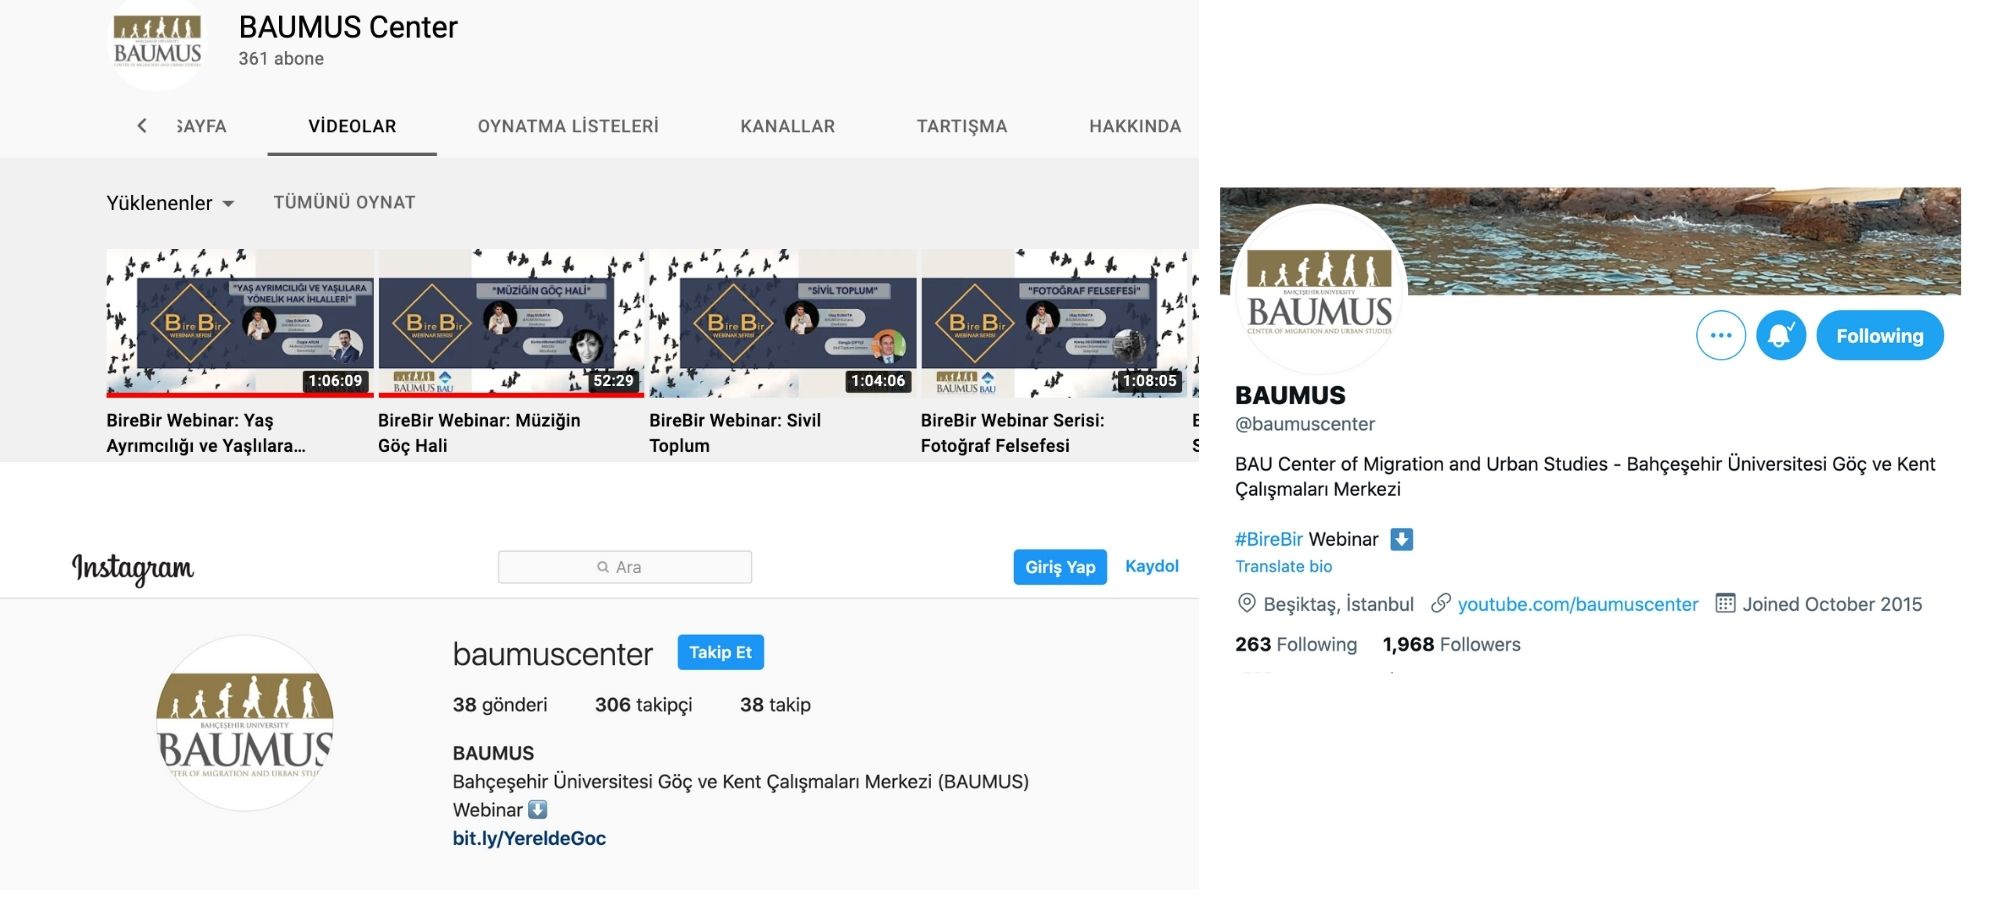 You Can Follow Current Developments About BAUMUS From Our Social Media Accounts